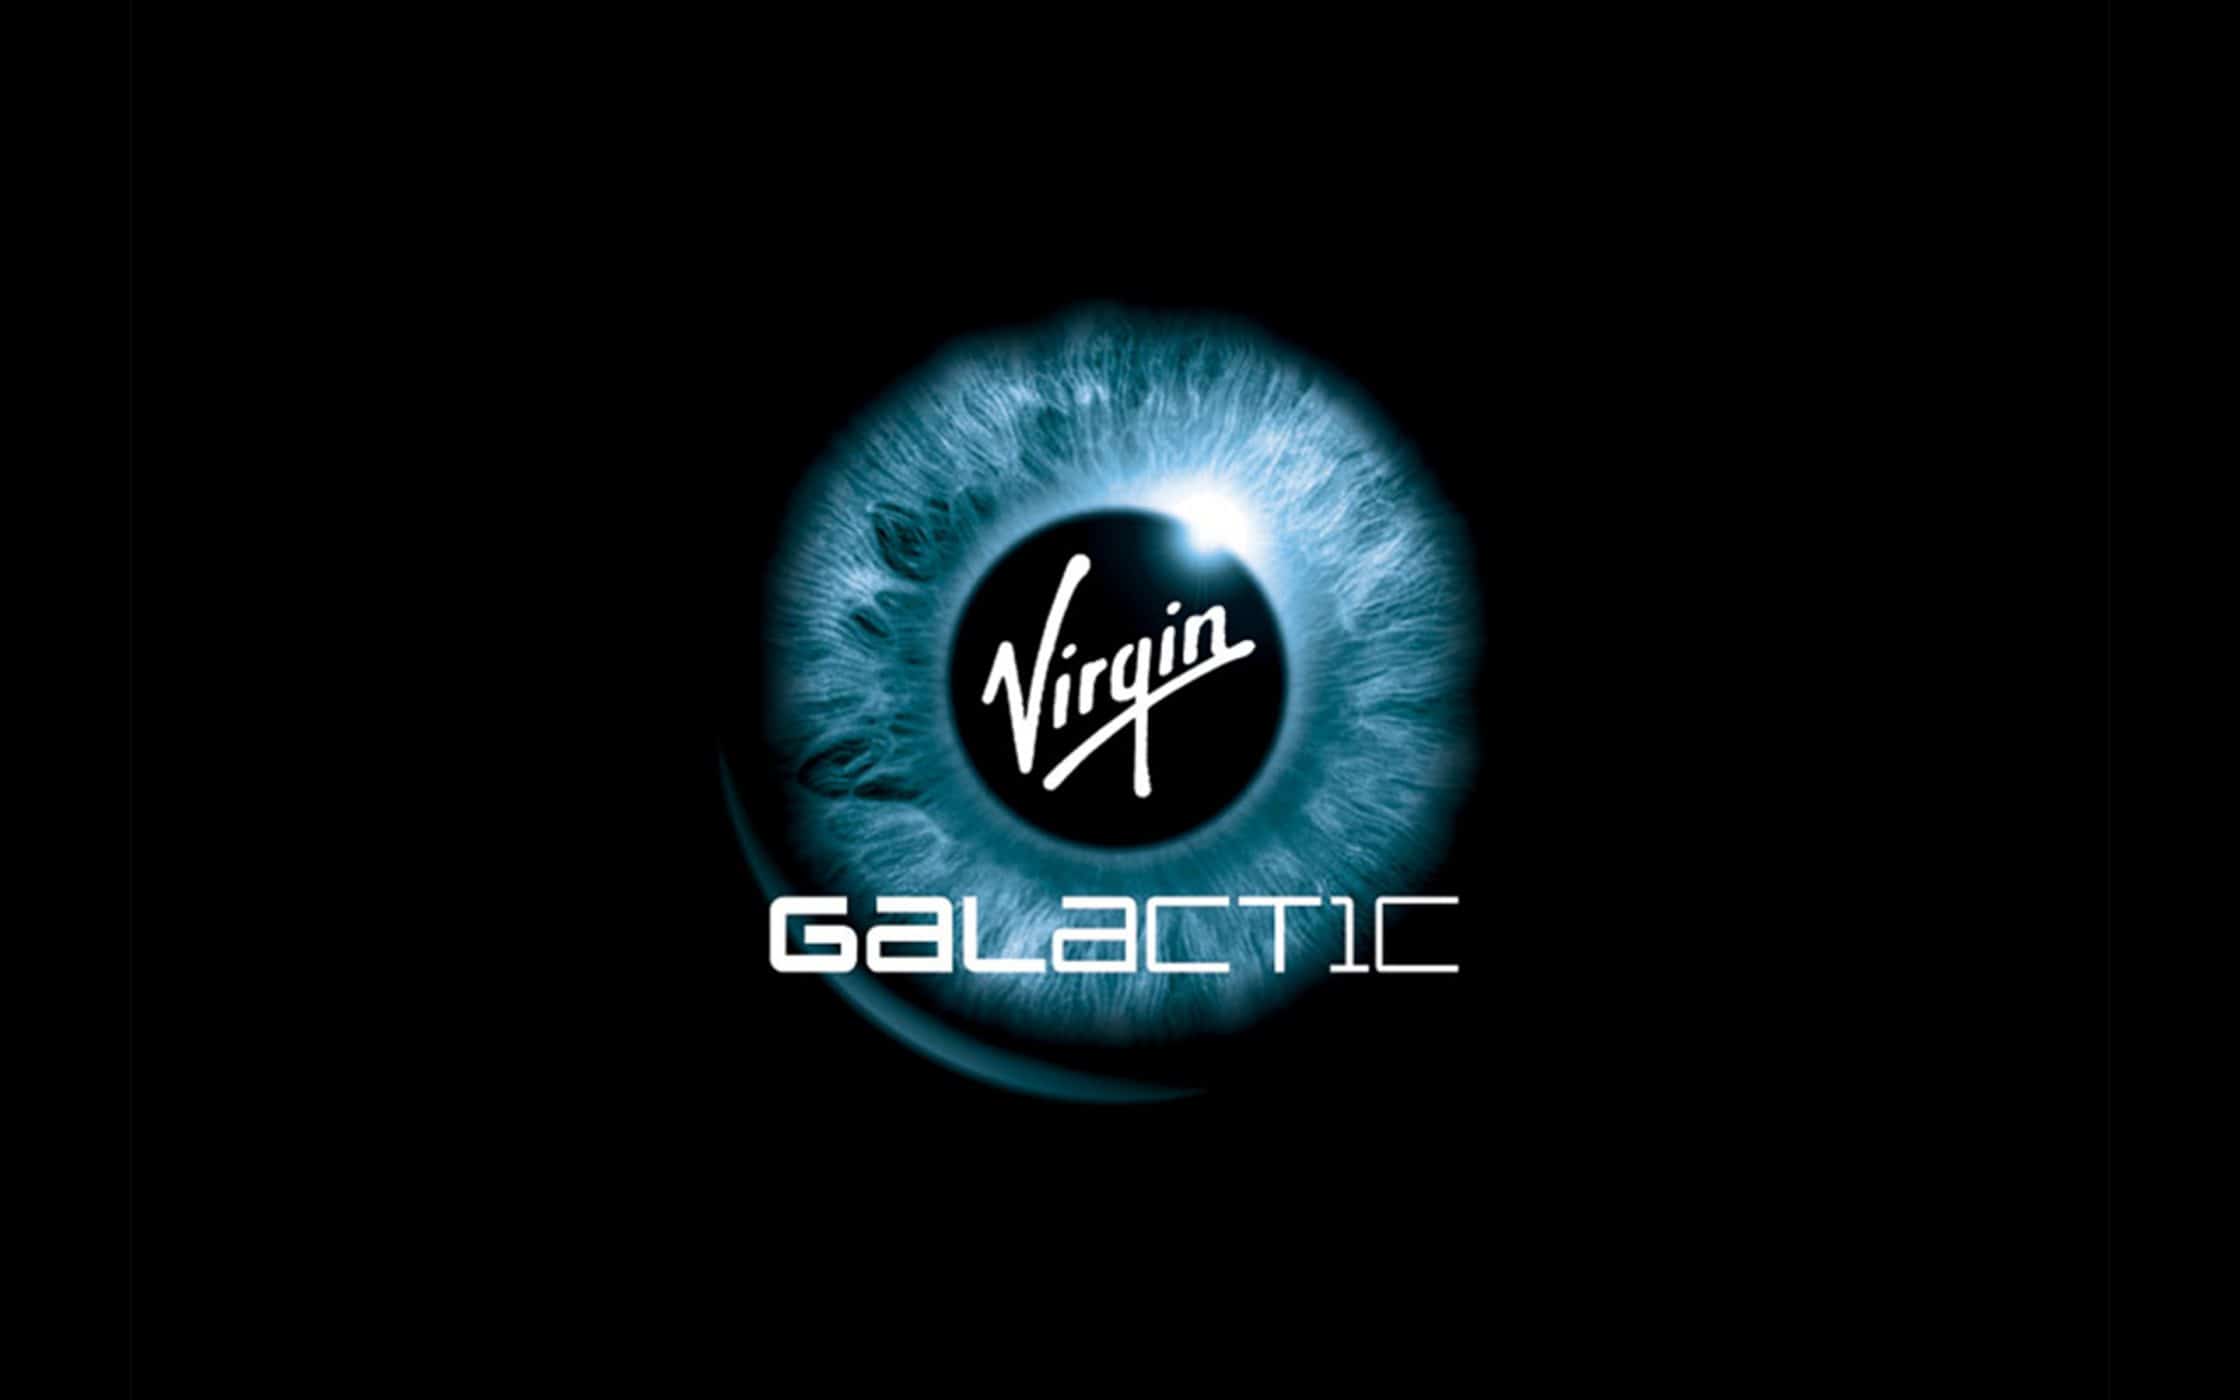 Virgin Galactic Logo - Future Brands: Out Of This World Branding From Virgin Galactic